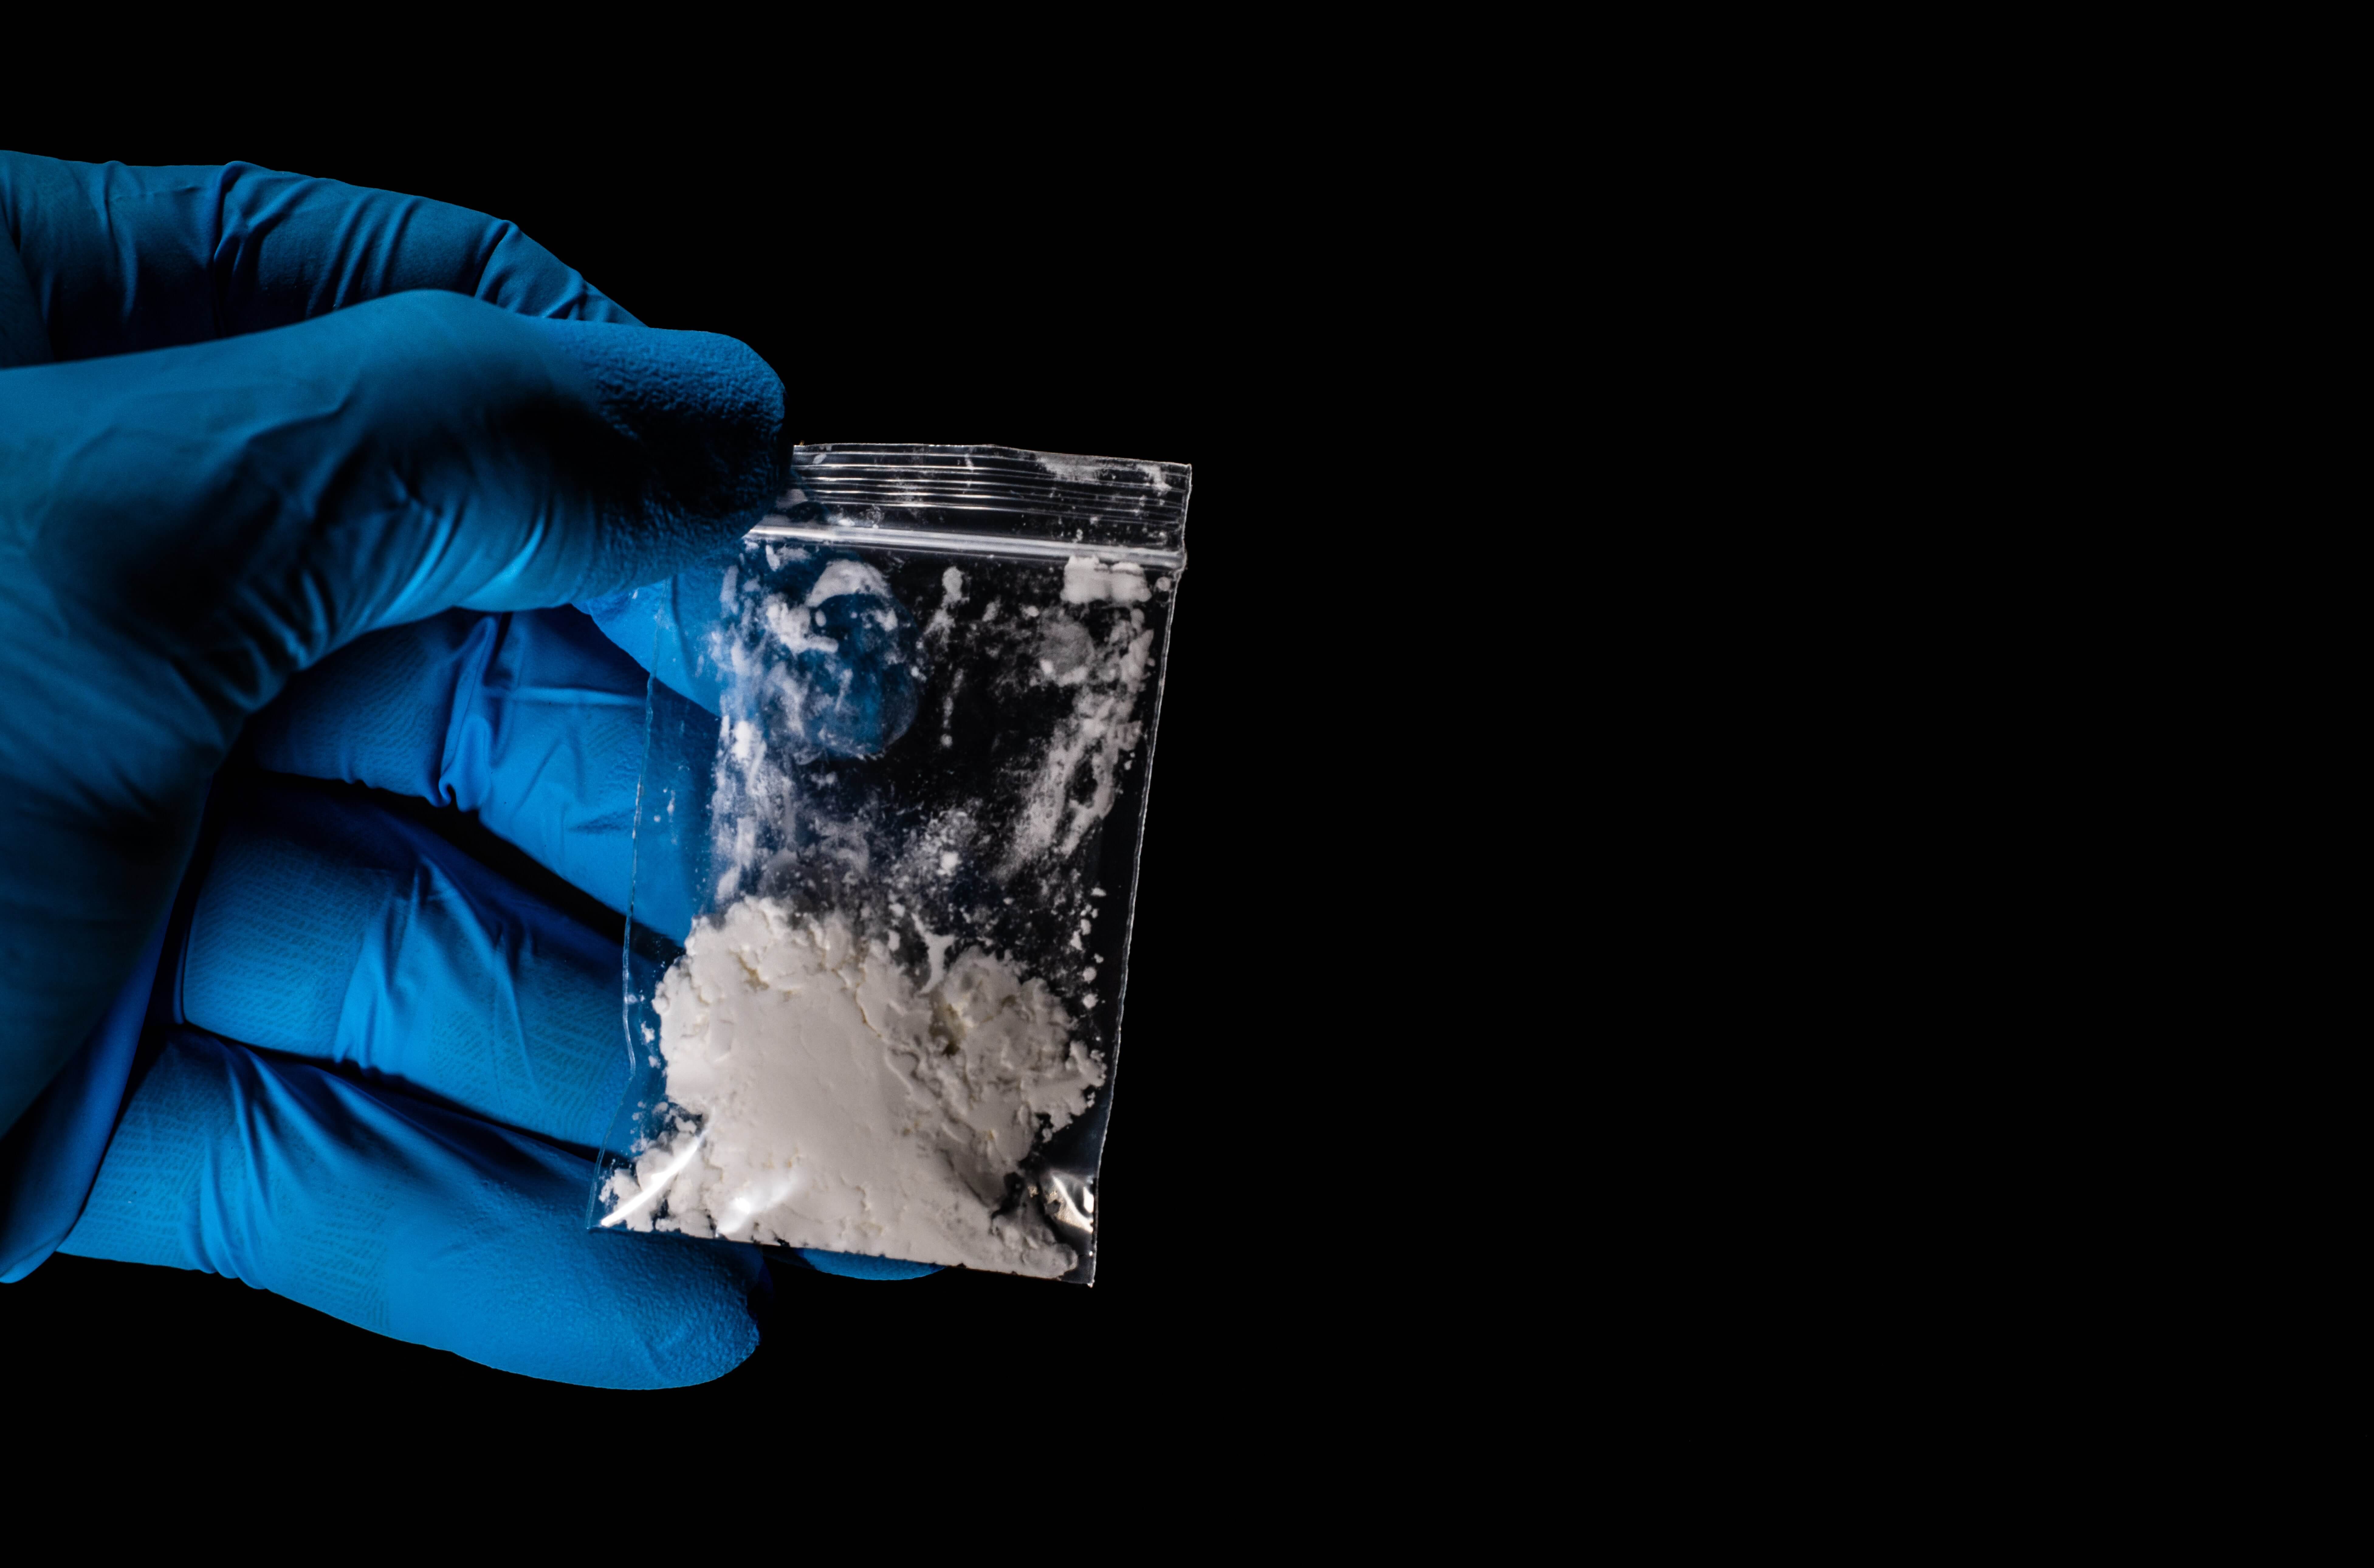 How Dangerous and Addictive is Fentanyl?